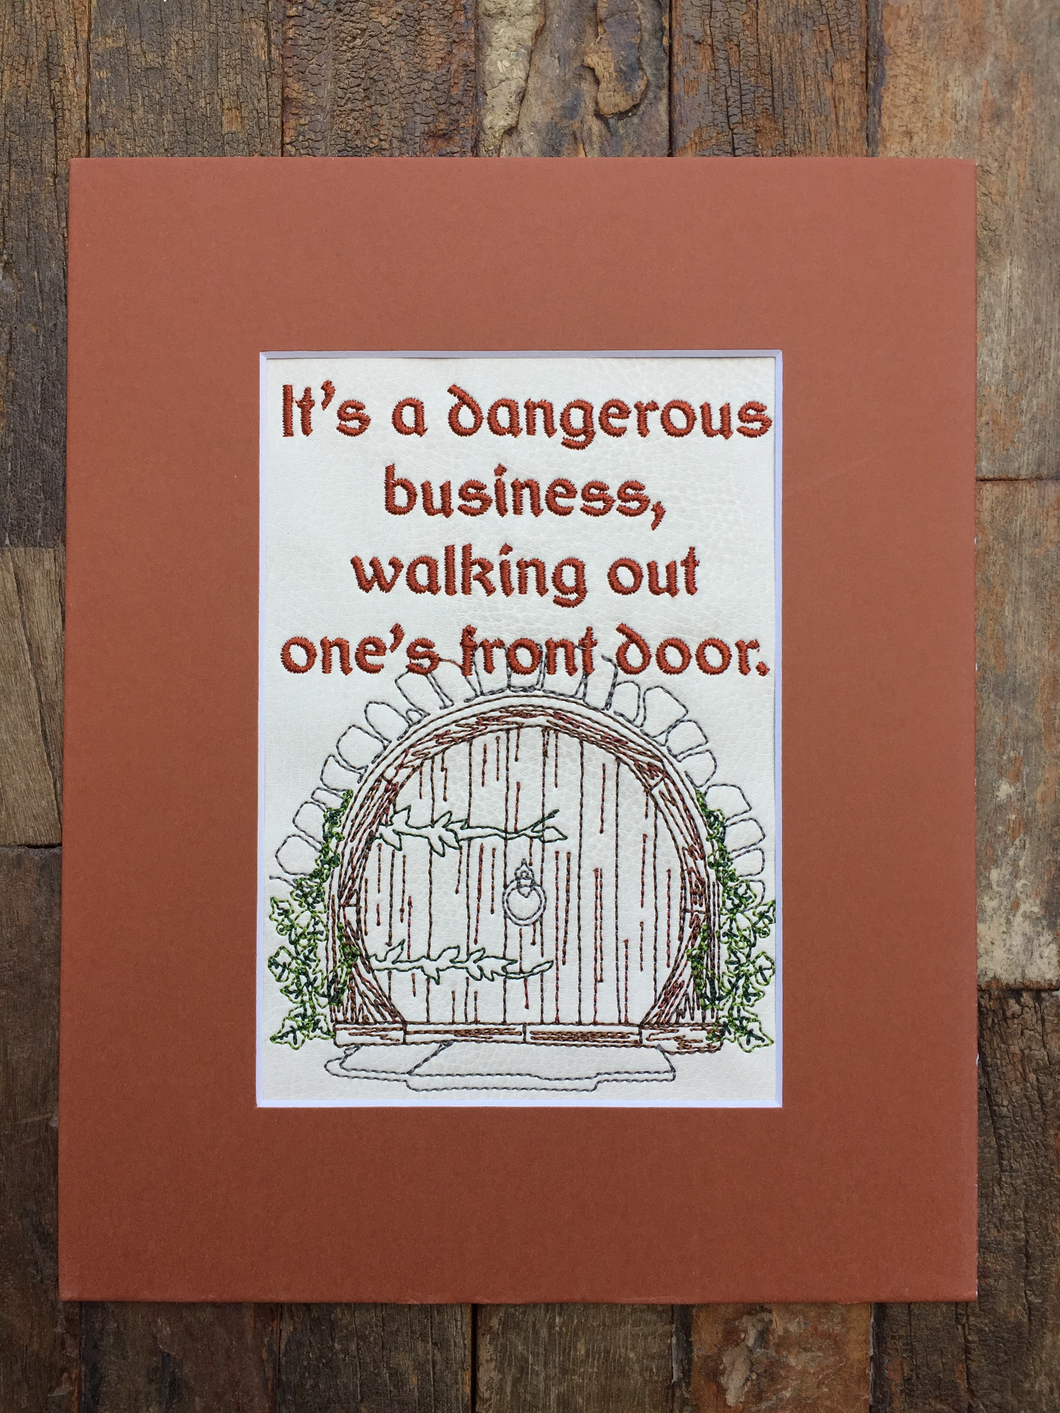 Embroidered Wall Hanging - Halfling Front Door - It's A Dangerous Business, Walking Out One's Front Door - Geeky Embroidery